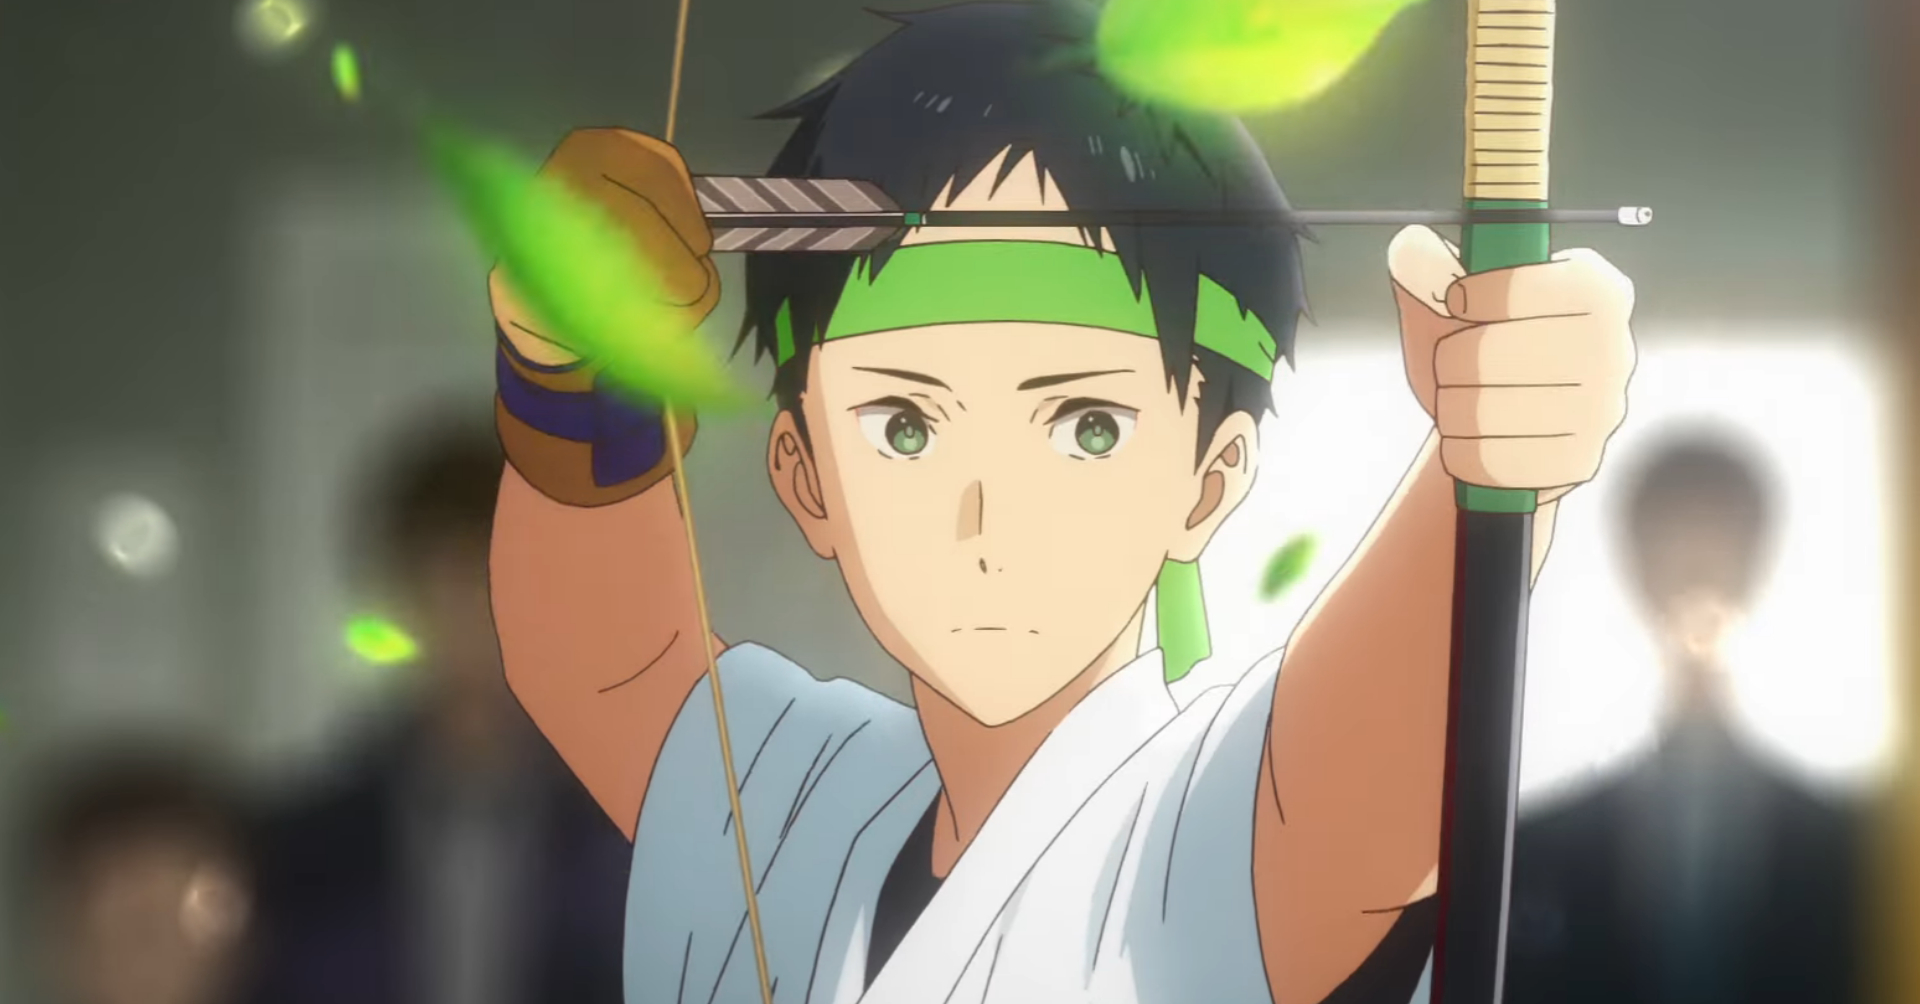 Stream TSURUNE The Movie - The First Shot on HIDIVE